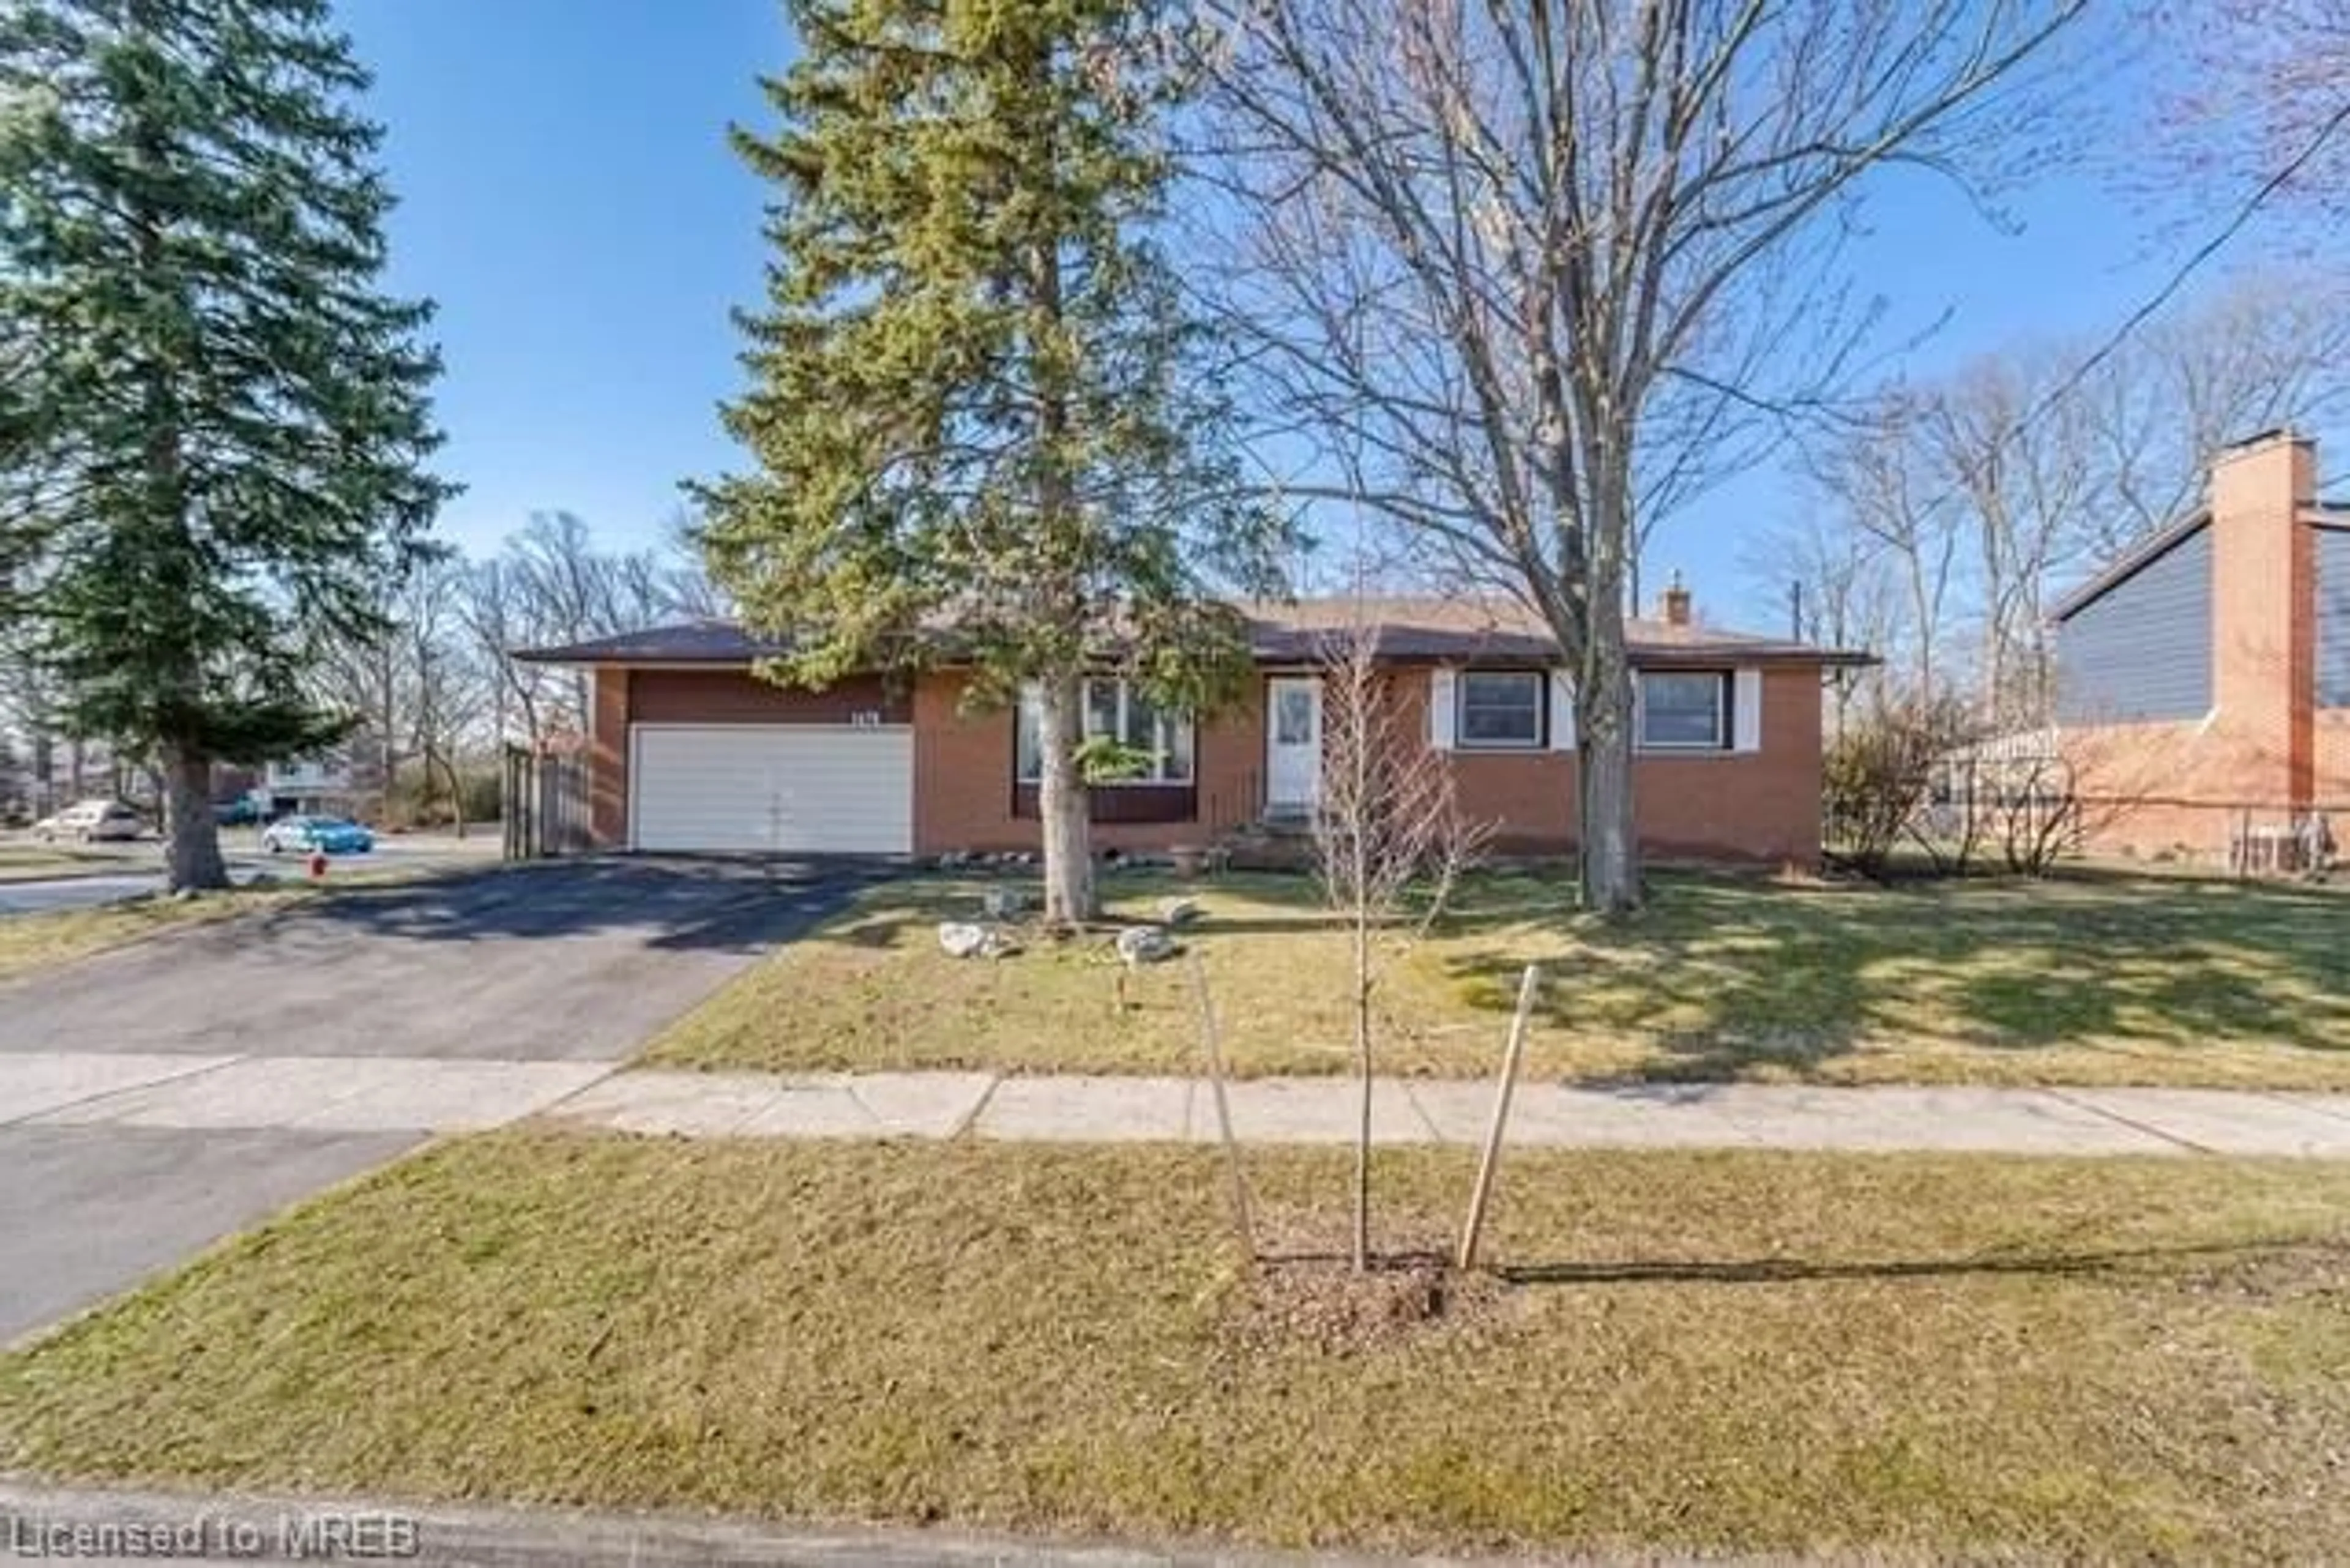 Frontside or backside of a home for 1478 Wise Ave, Burlington Ontario L7P 2P8